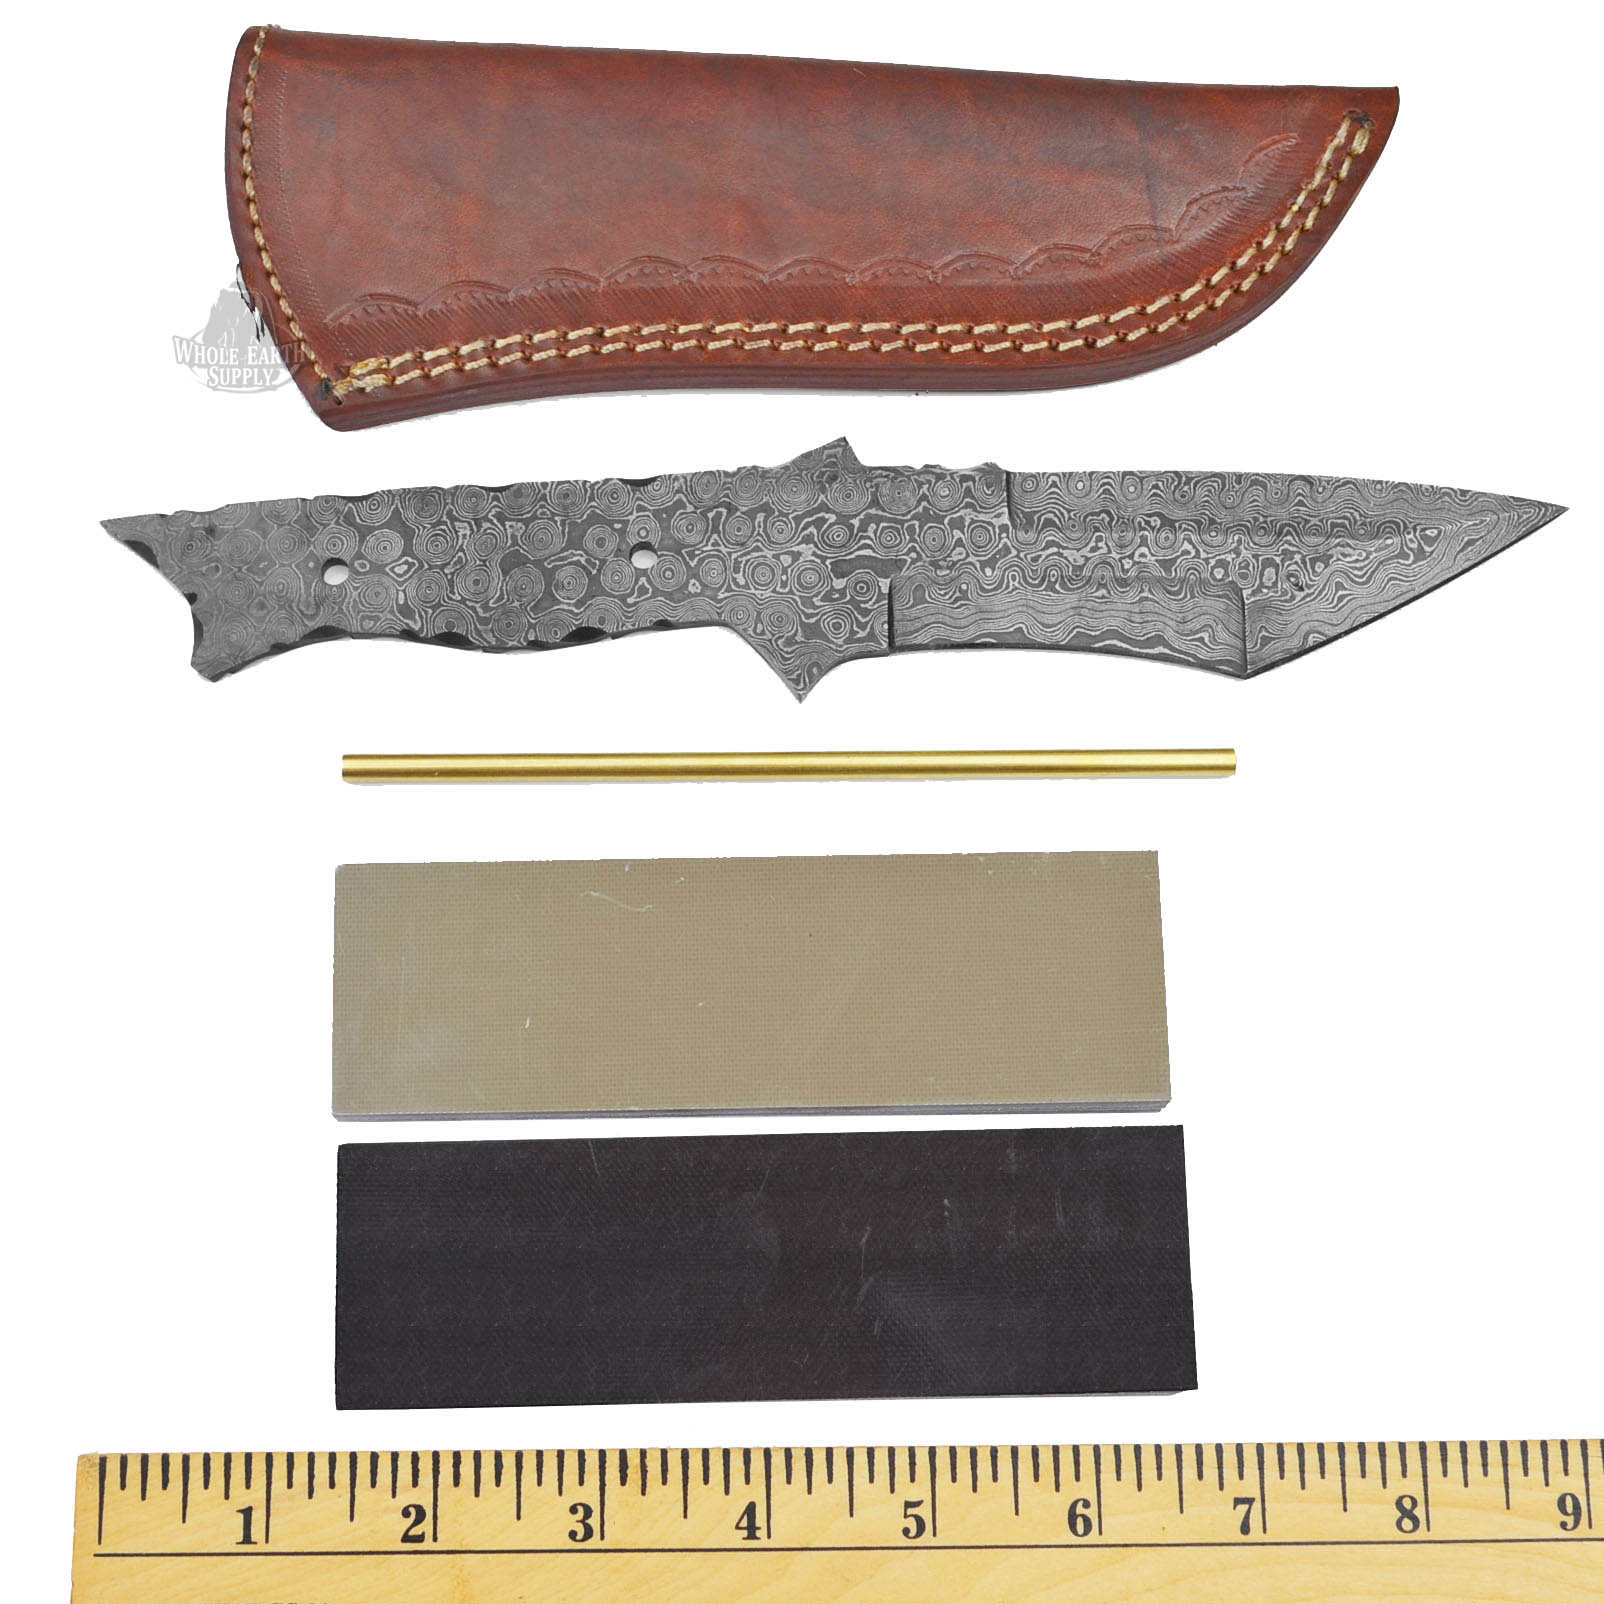 (Knife Kit) Build Your Own Damascus Tanto Knife with Tan & Black G-10 Handles and Mosaic Pin Combo Blank 